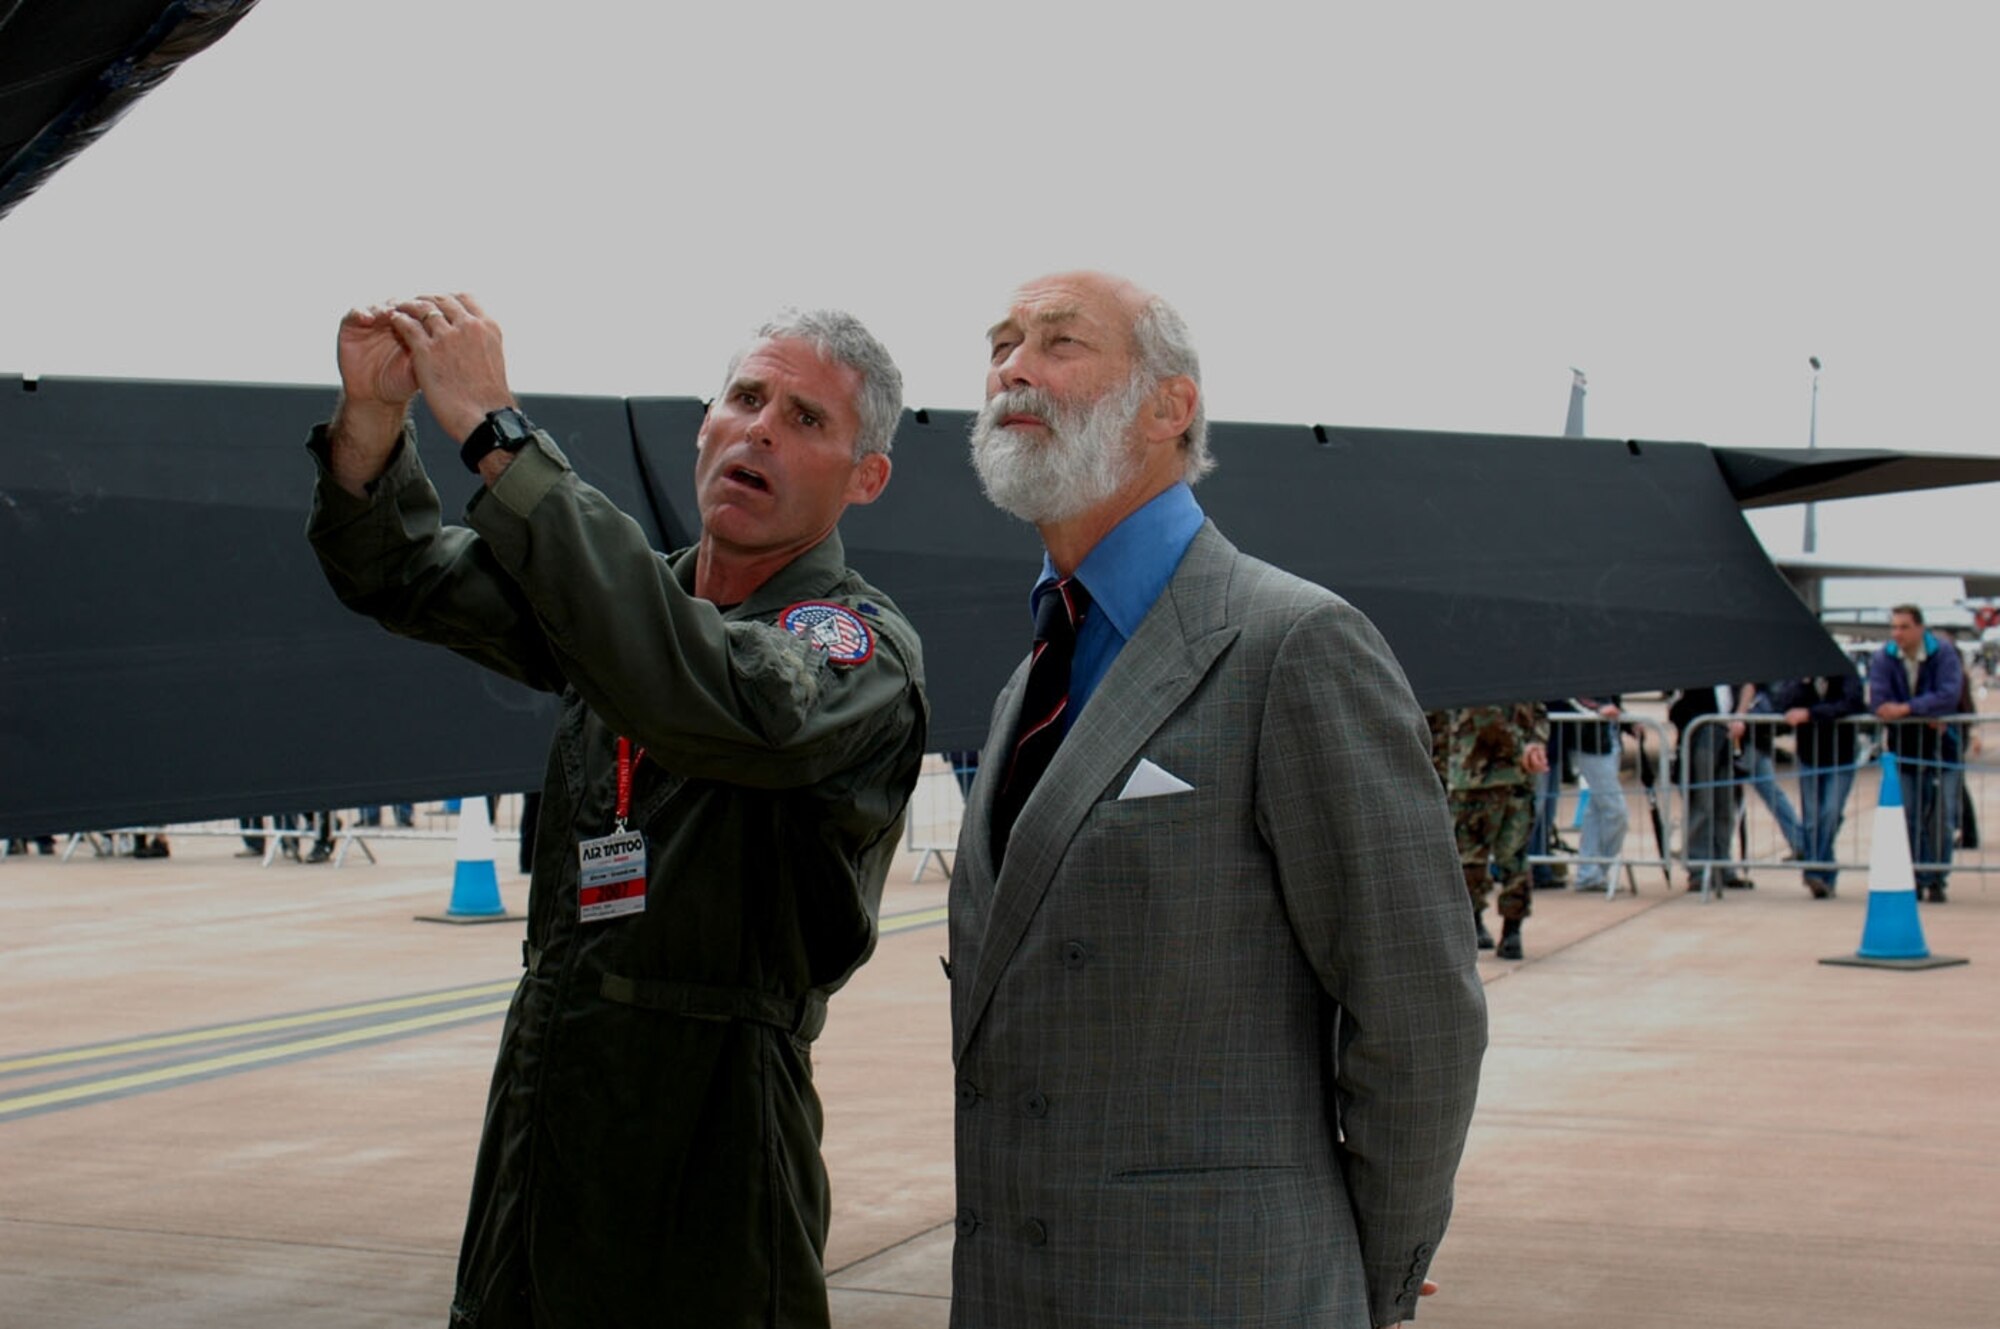 Lt. Col. Pete York, F-117A pilot, describes the stealth fighter’s control surfaces to Prince Michael of Kent during the international air show at Fairford, England July 14. The F-117 Demonstration Team was one the featured acts at the two-day Royal International Air Tattoo. (U.S. Air Force photo/ Mr. Tommy Fuller)